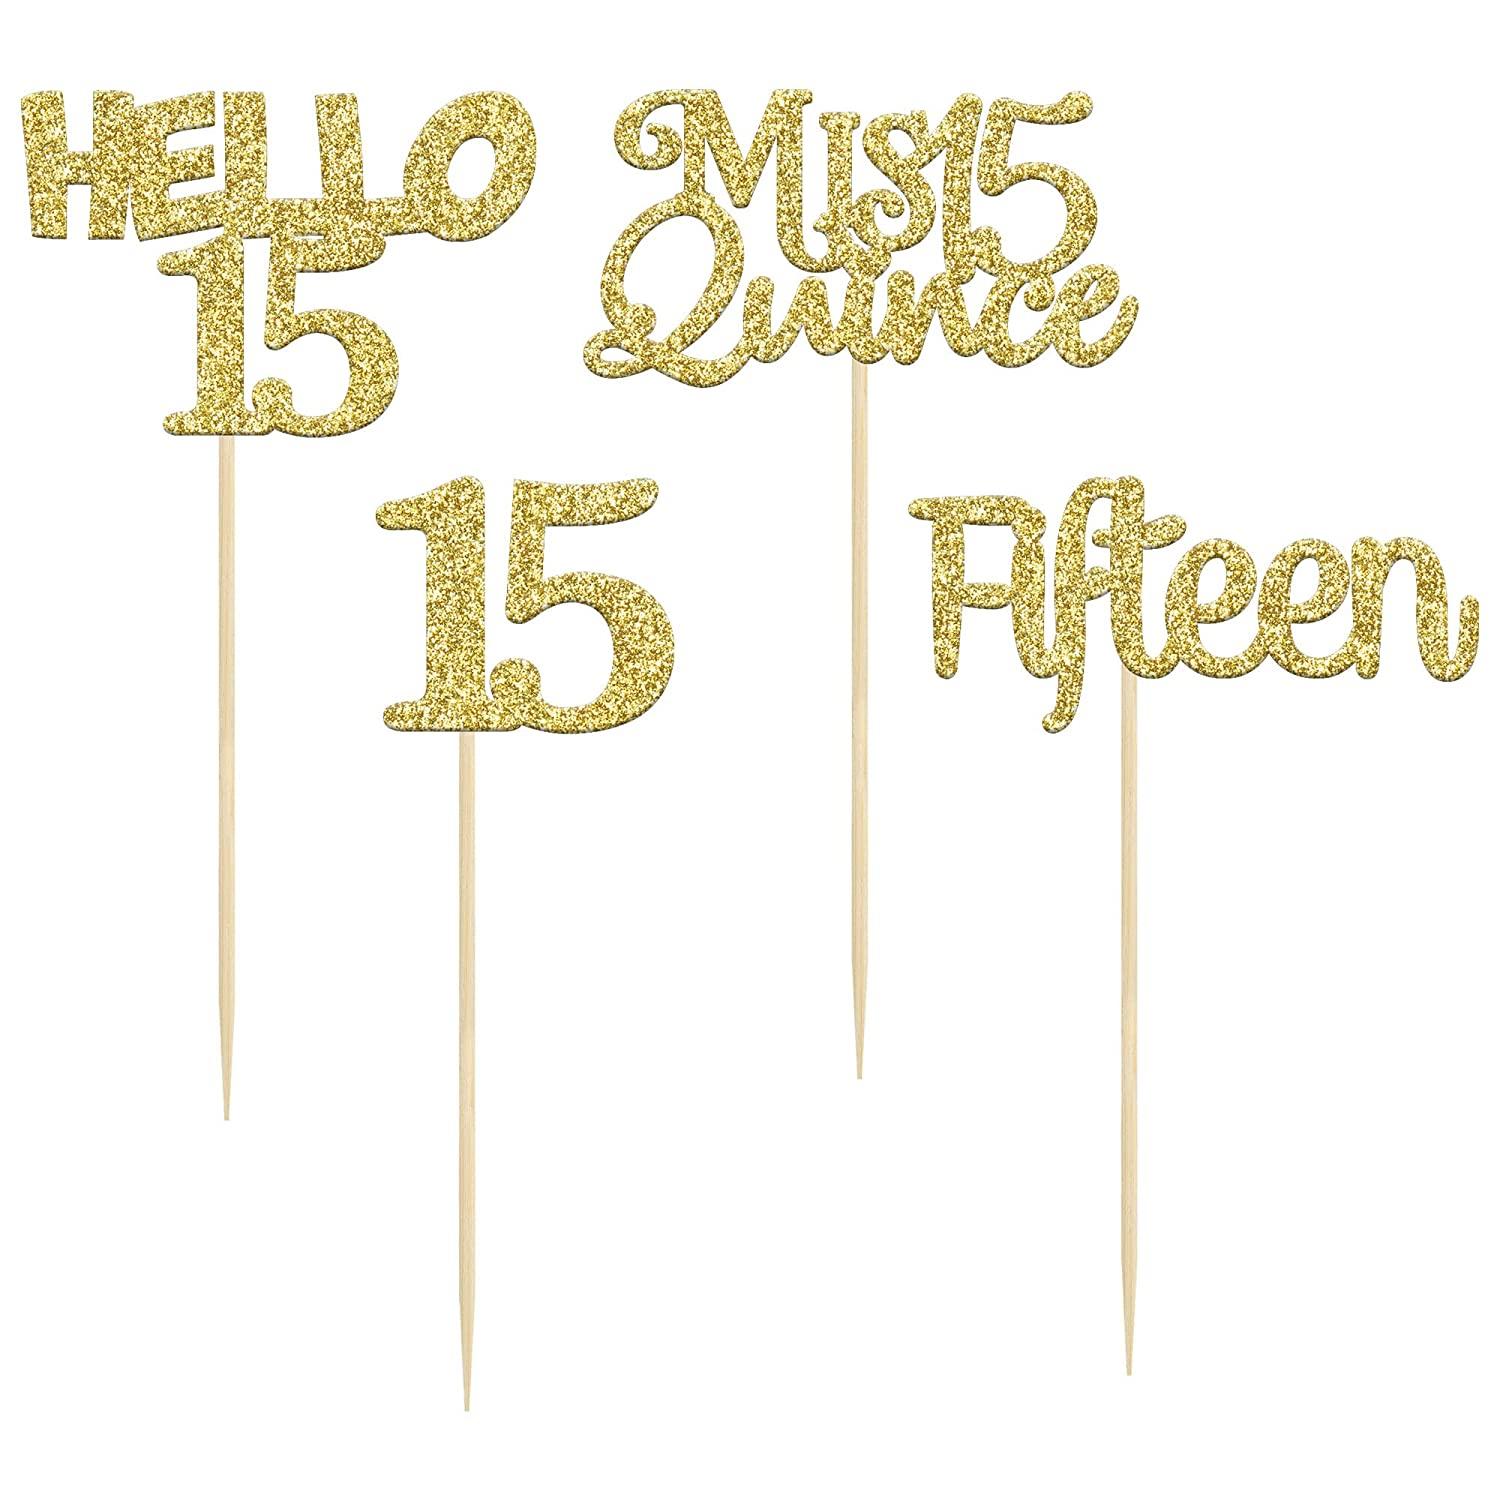 15th Birthday Cake Topper. Number 15 Cake Topper. 15th Birthday Decoration.  Mis Quince Anos. Fifteenth Birthday. 